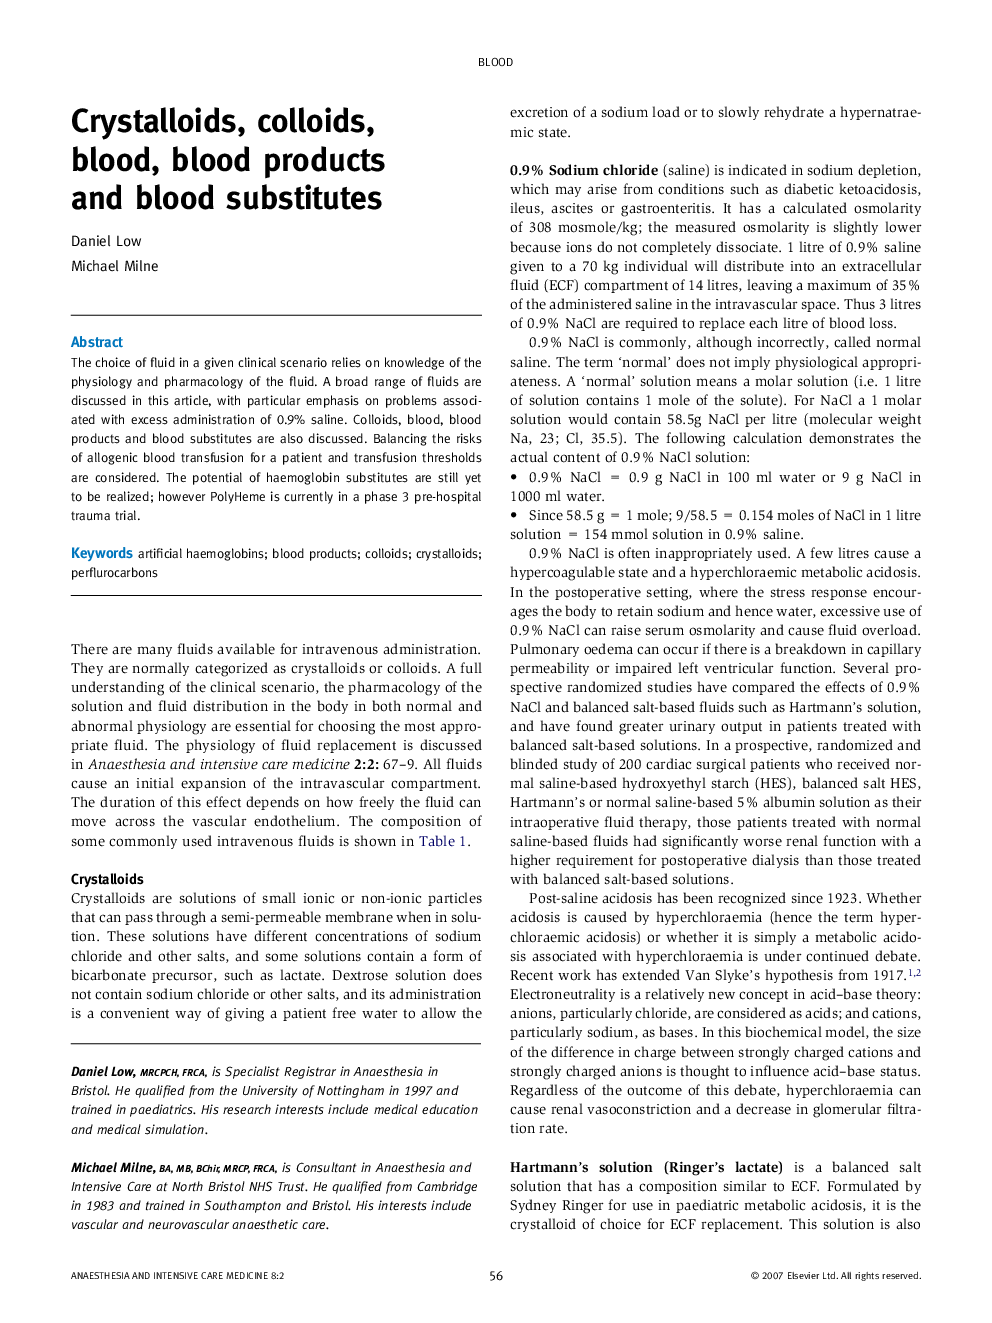 Crystalloids, colloids, blood, blood products and blood substitutes